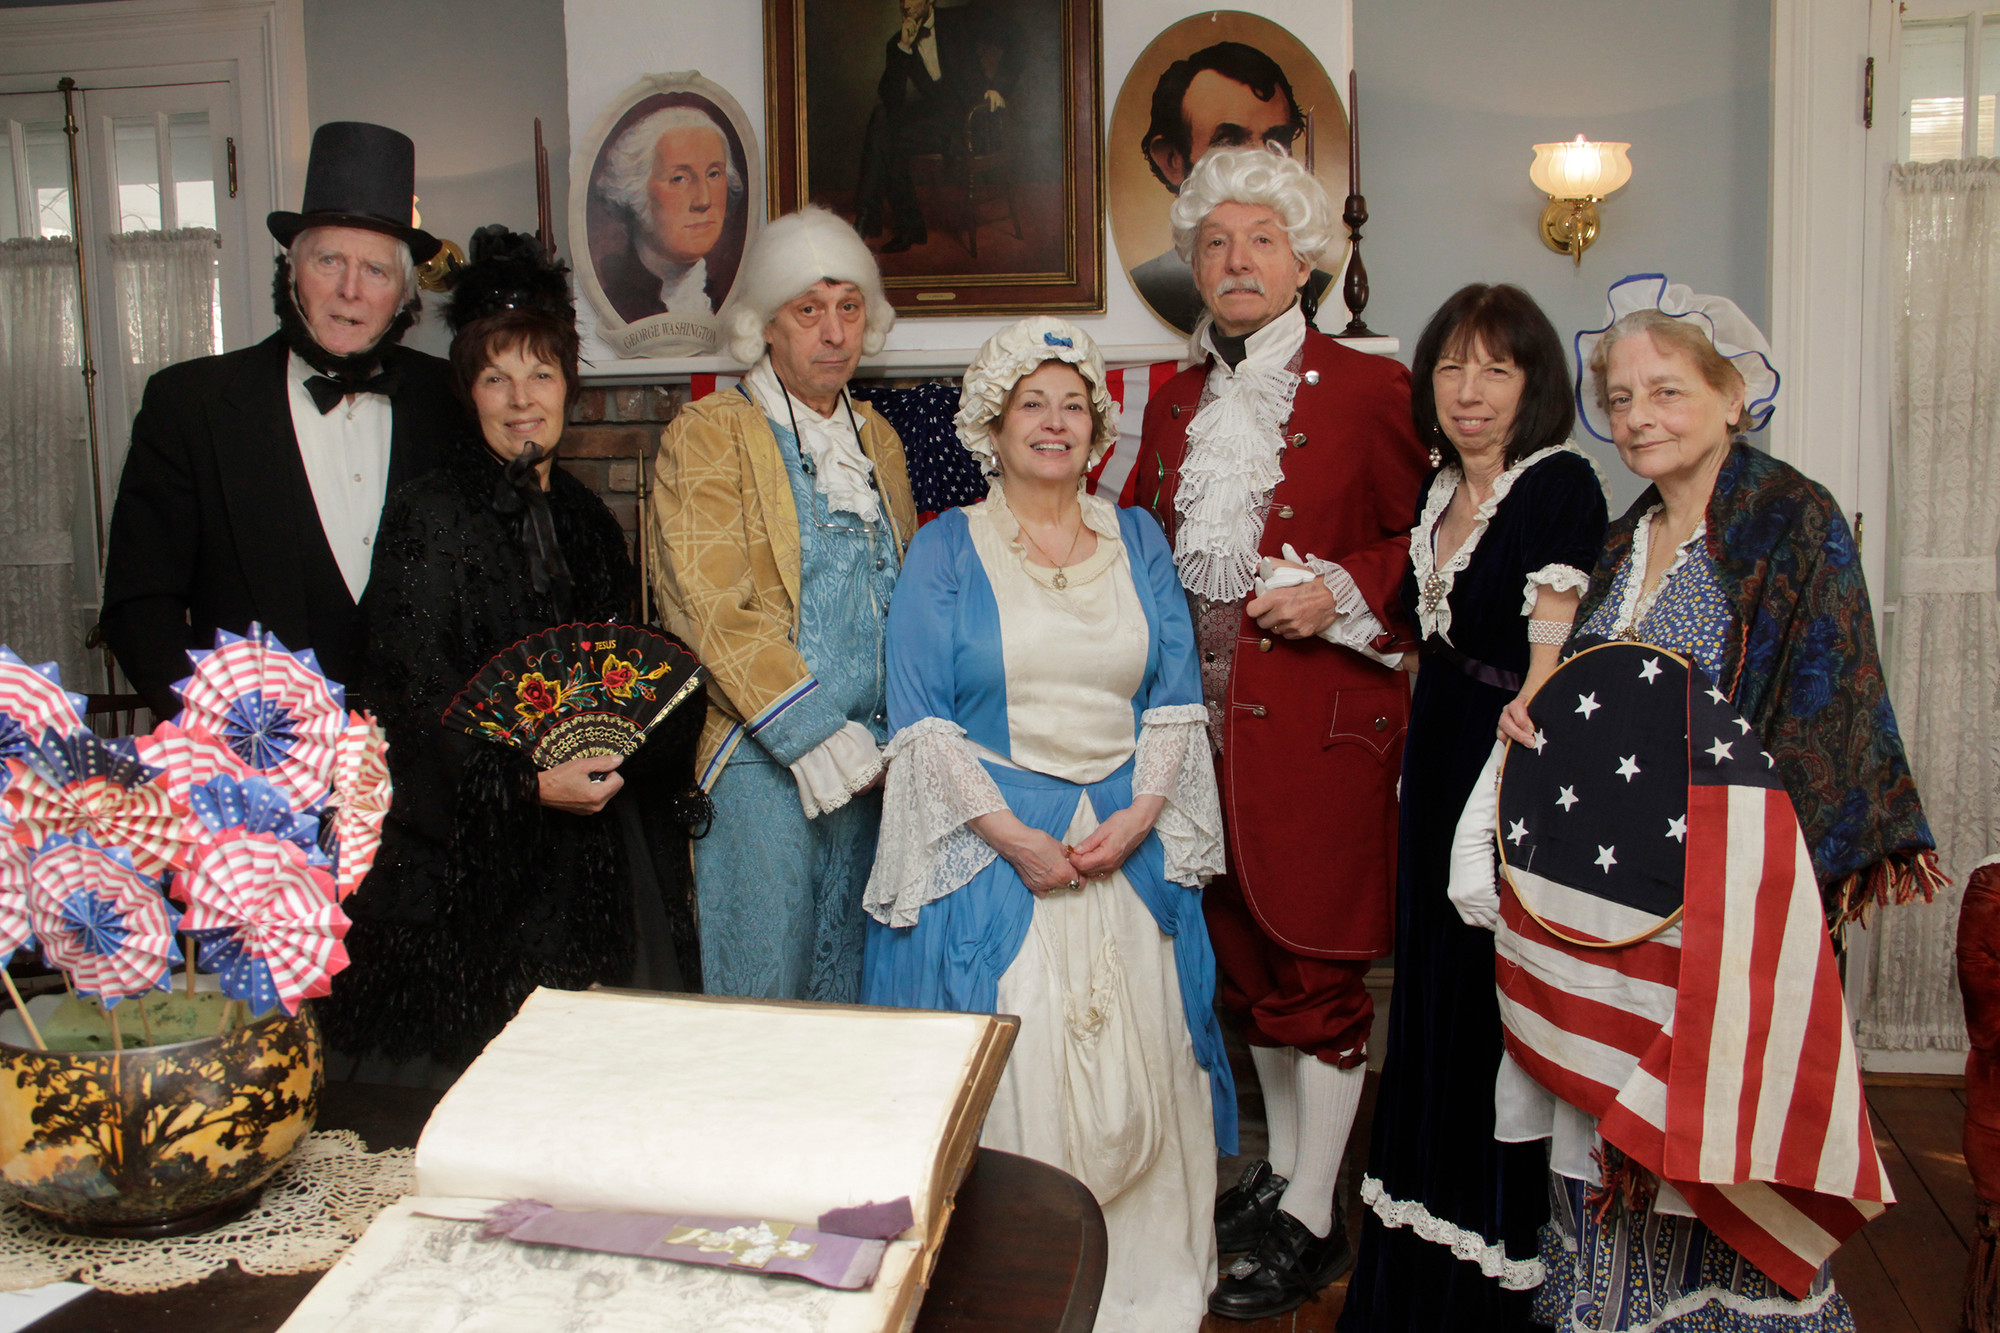 Pagan-Fletcher Characters Abe Lincoln, Susan McKean as Mary Todd Lincoln, Angelo LaCalandra as George Washington, Karen Selah as Martha Washington, Guy Ferrara  as General Lafayette, Valerie Esposito as Madame Lafayette and Catherine Dellis as Betsy Ross.